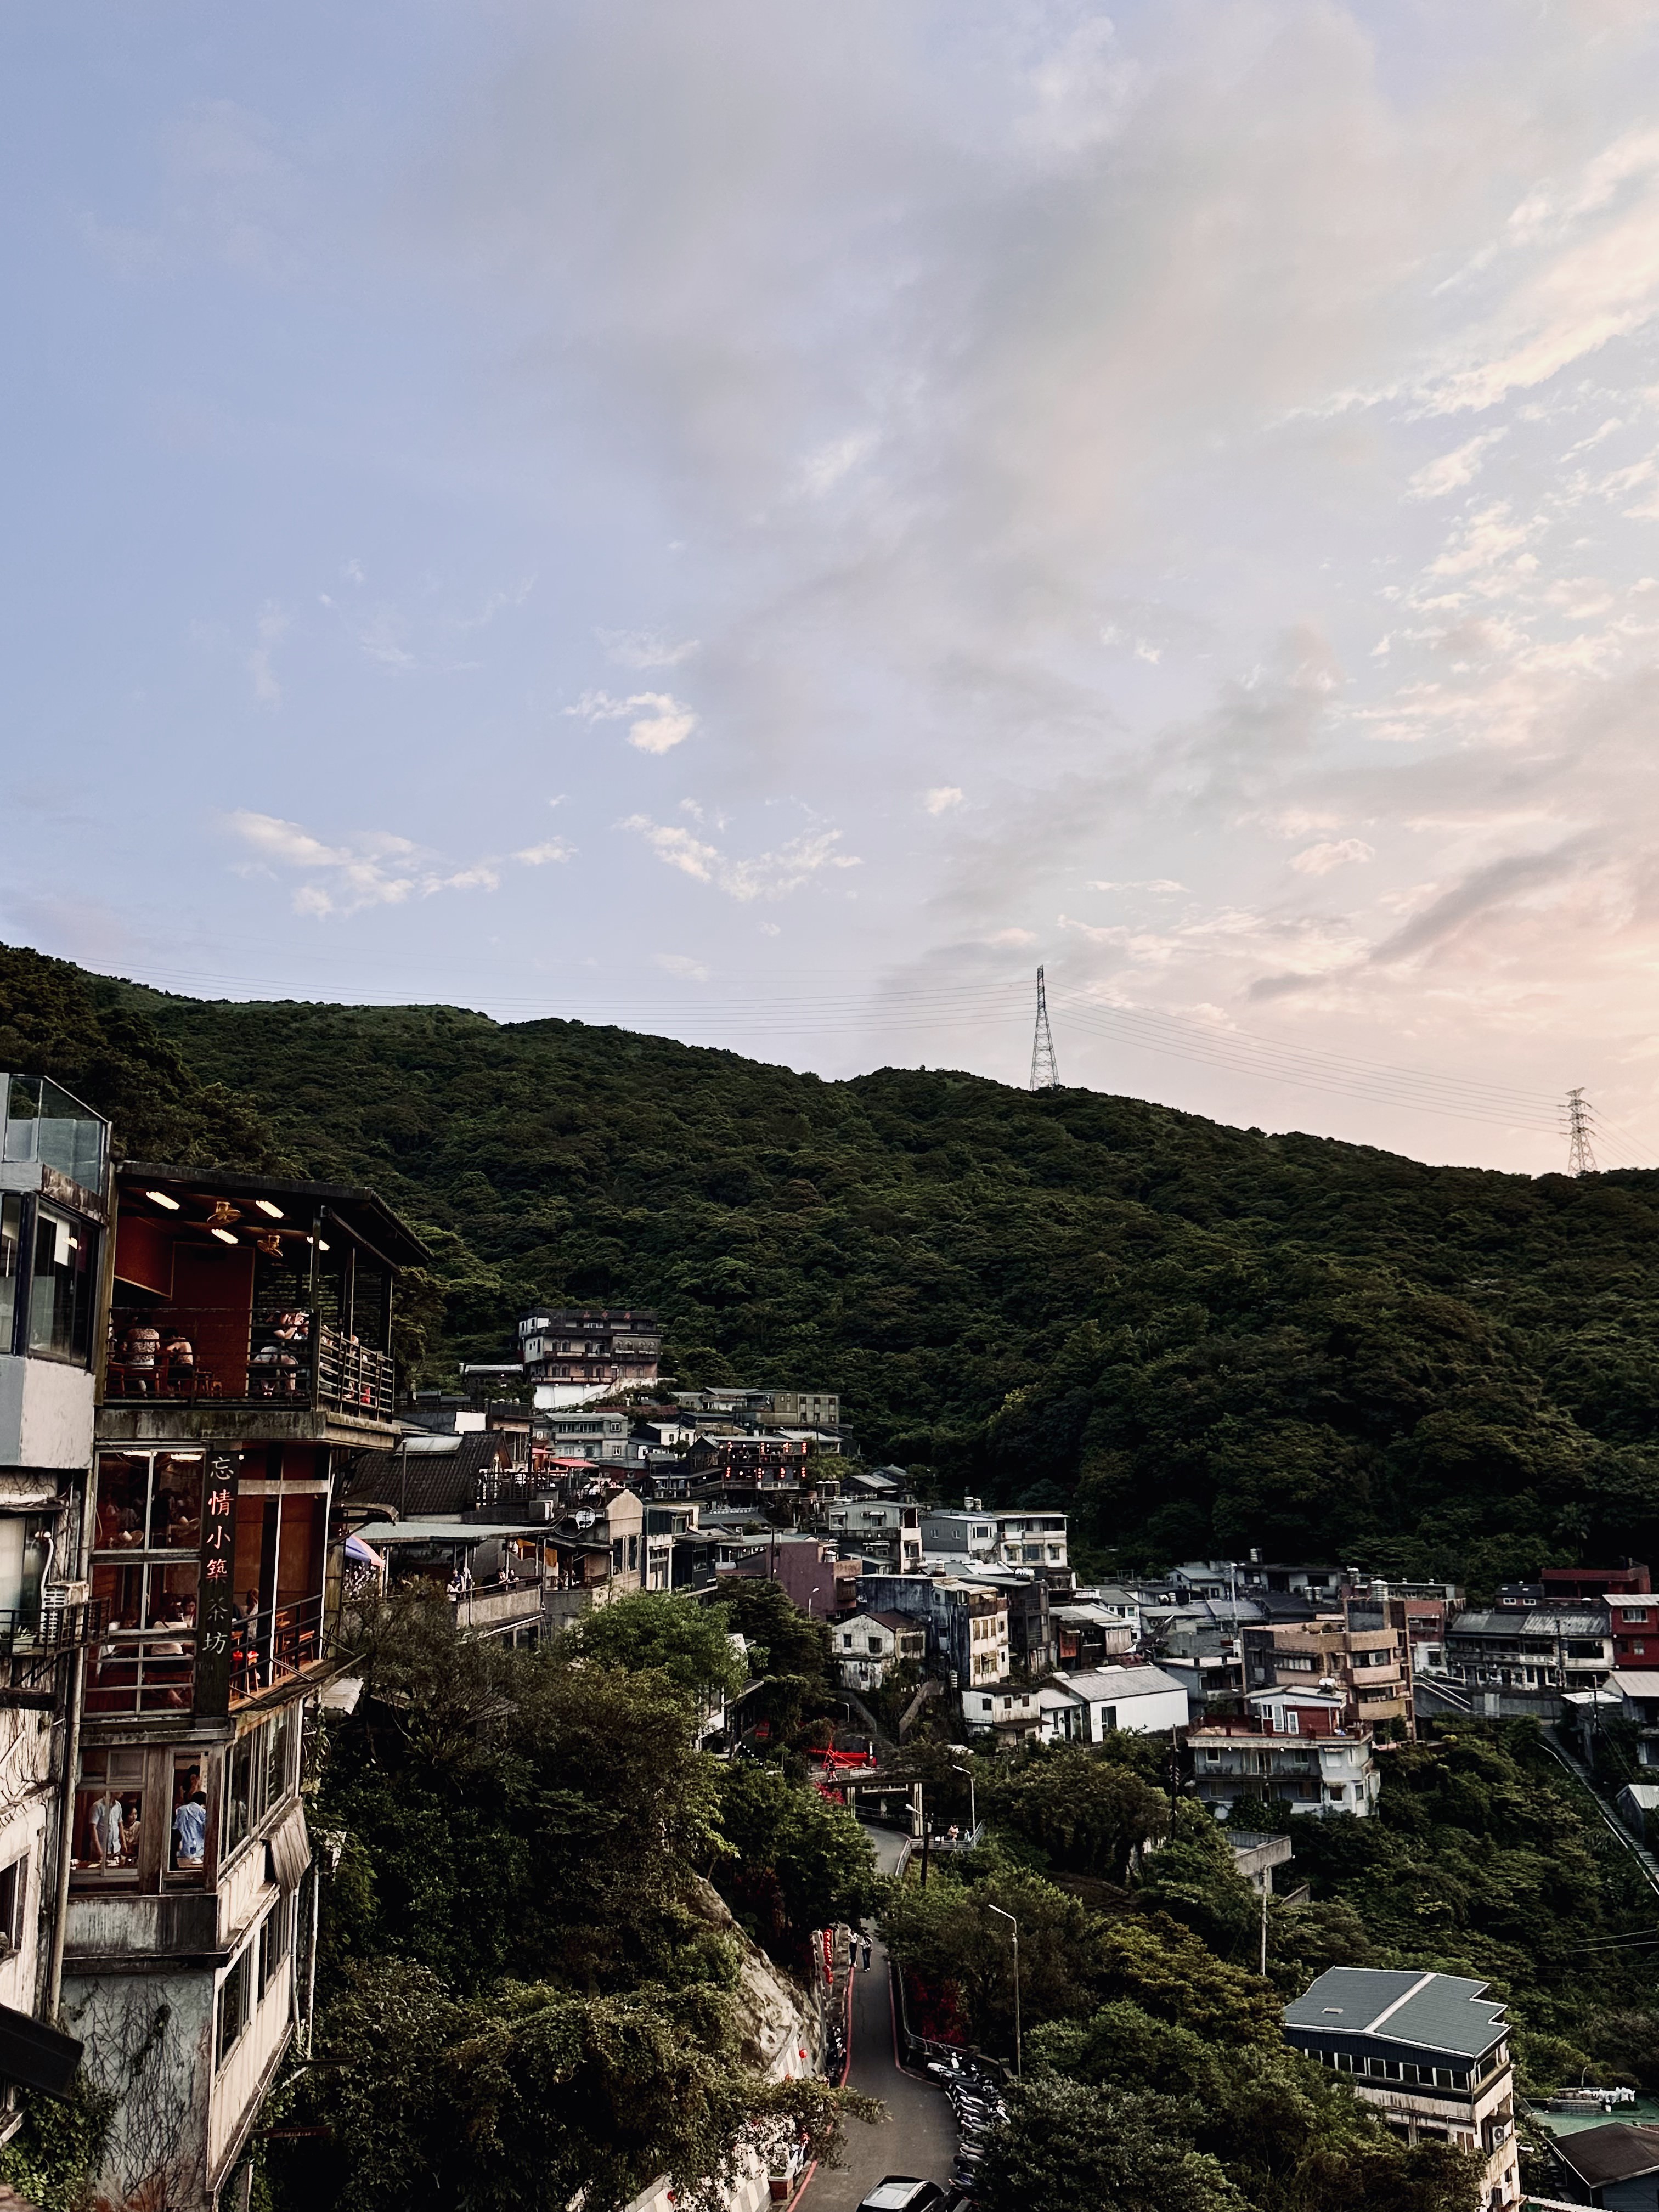 A view from Jiufen